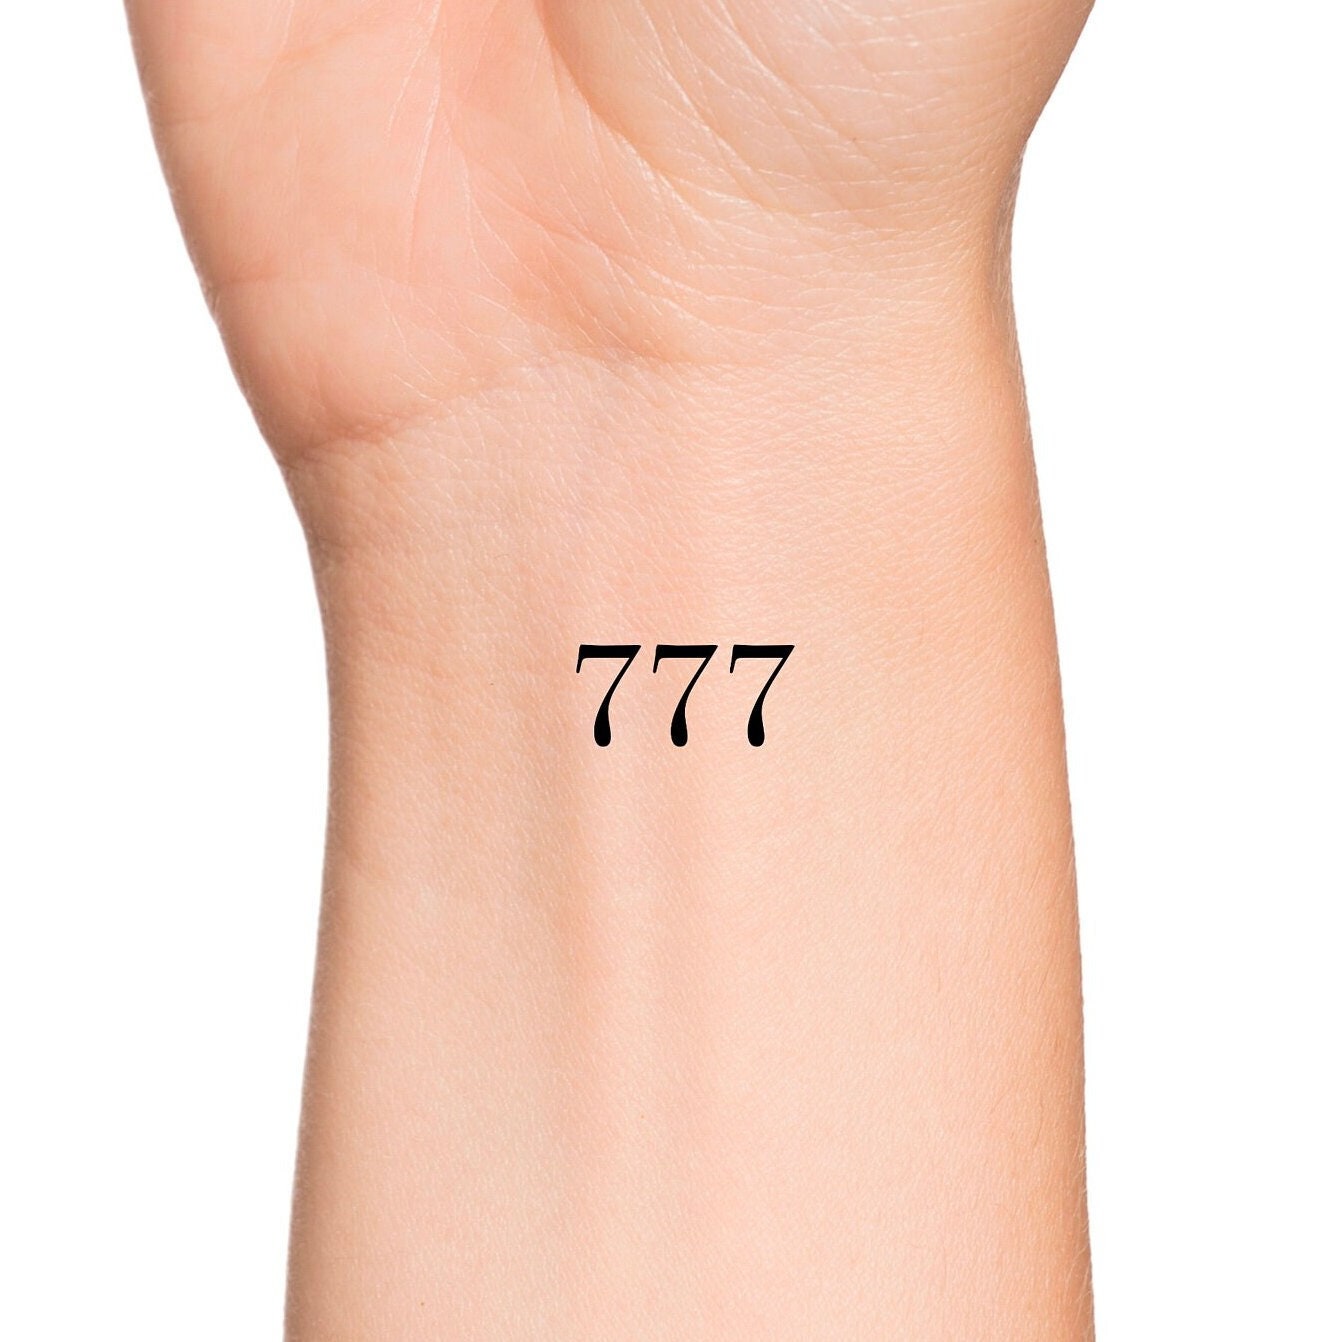 The 777 Tattoo Meaning And 110 Ideas For Divinity And Luck